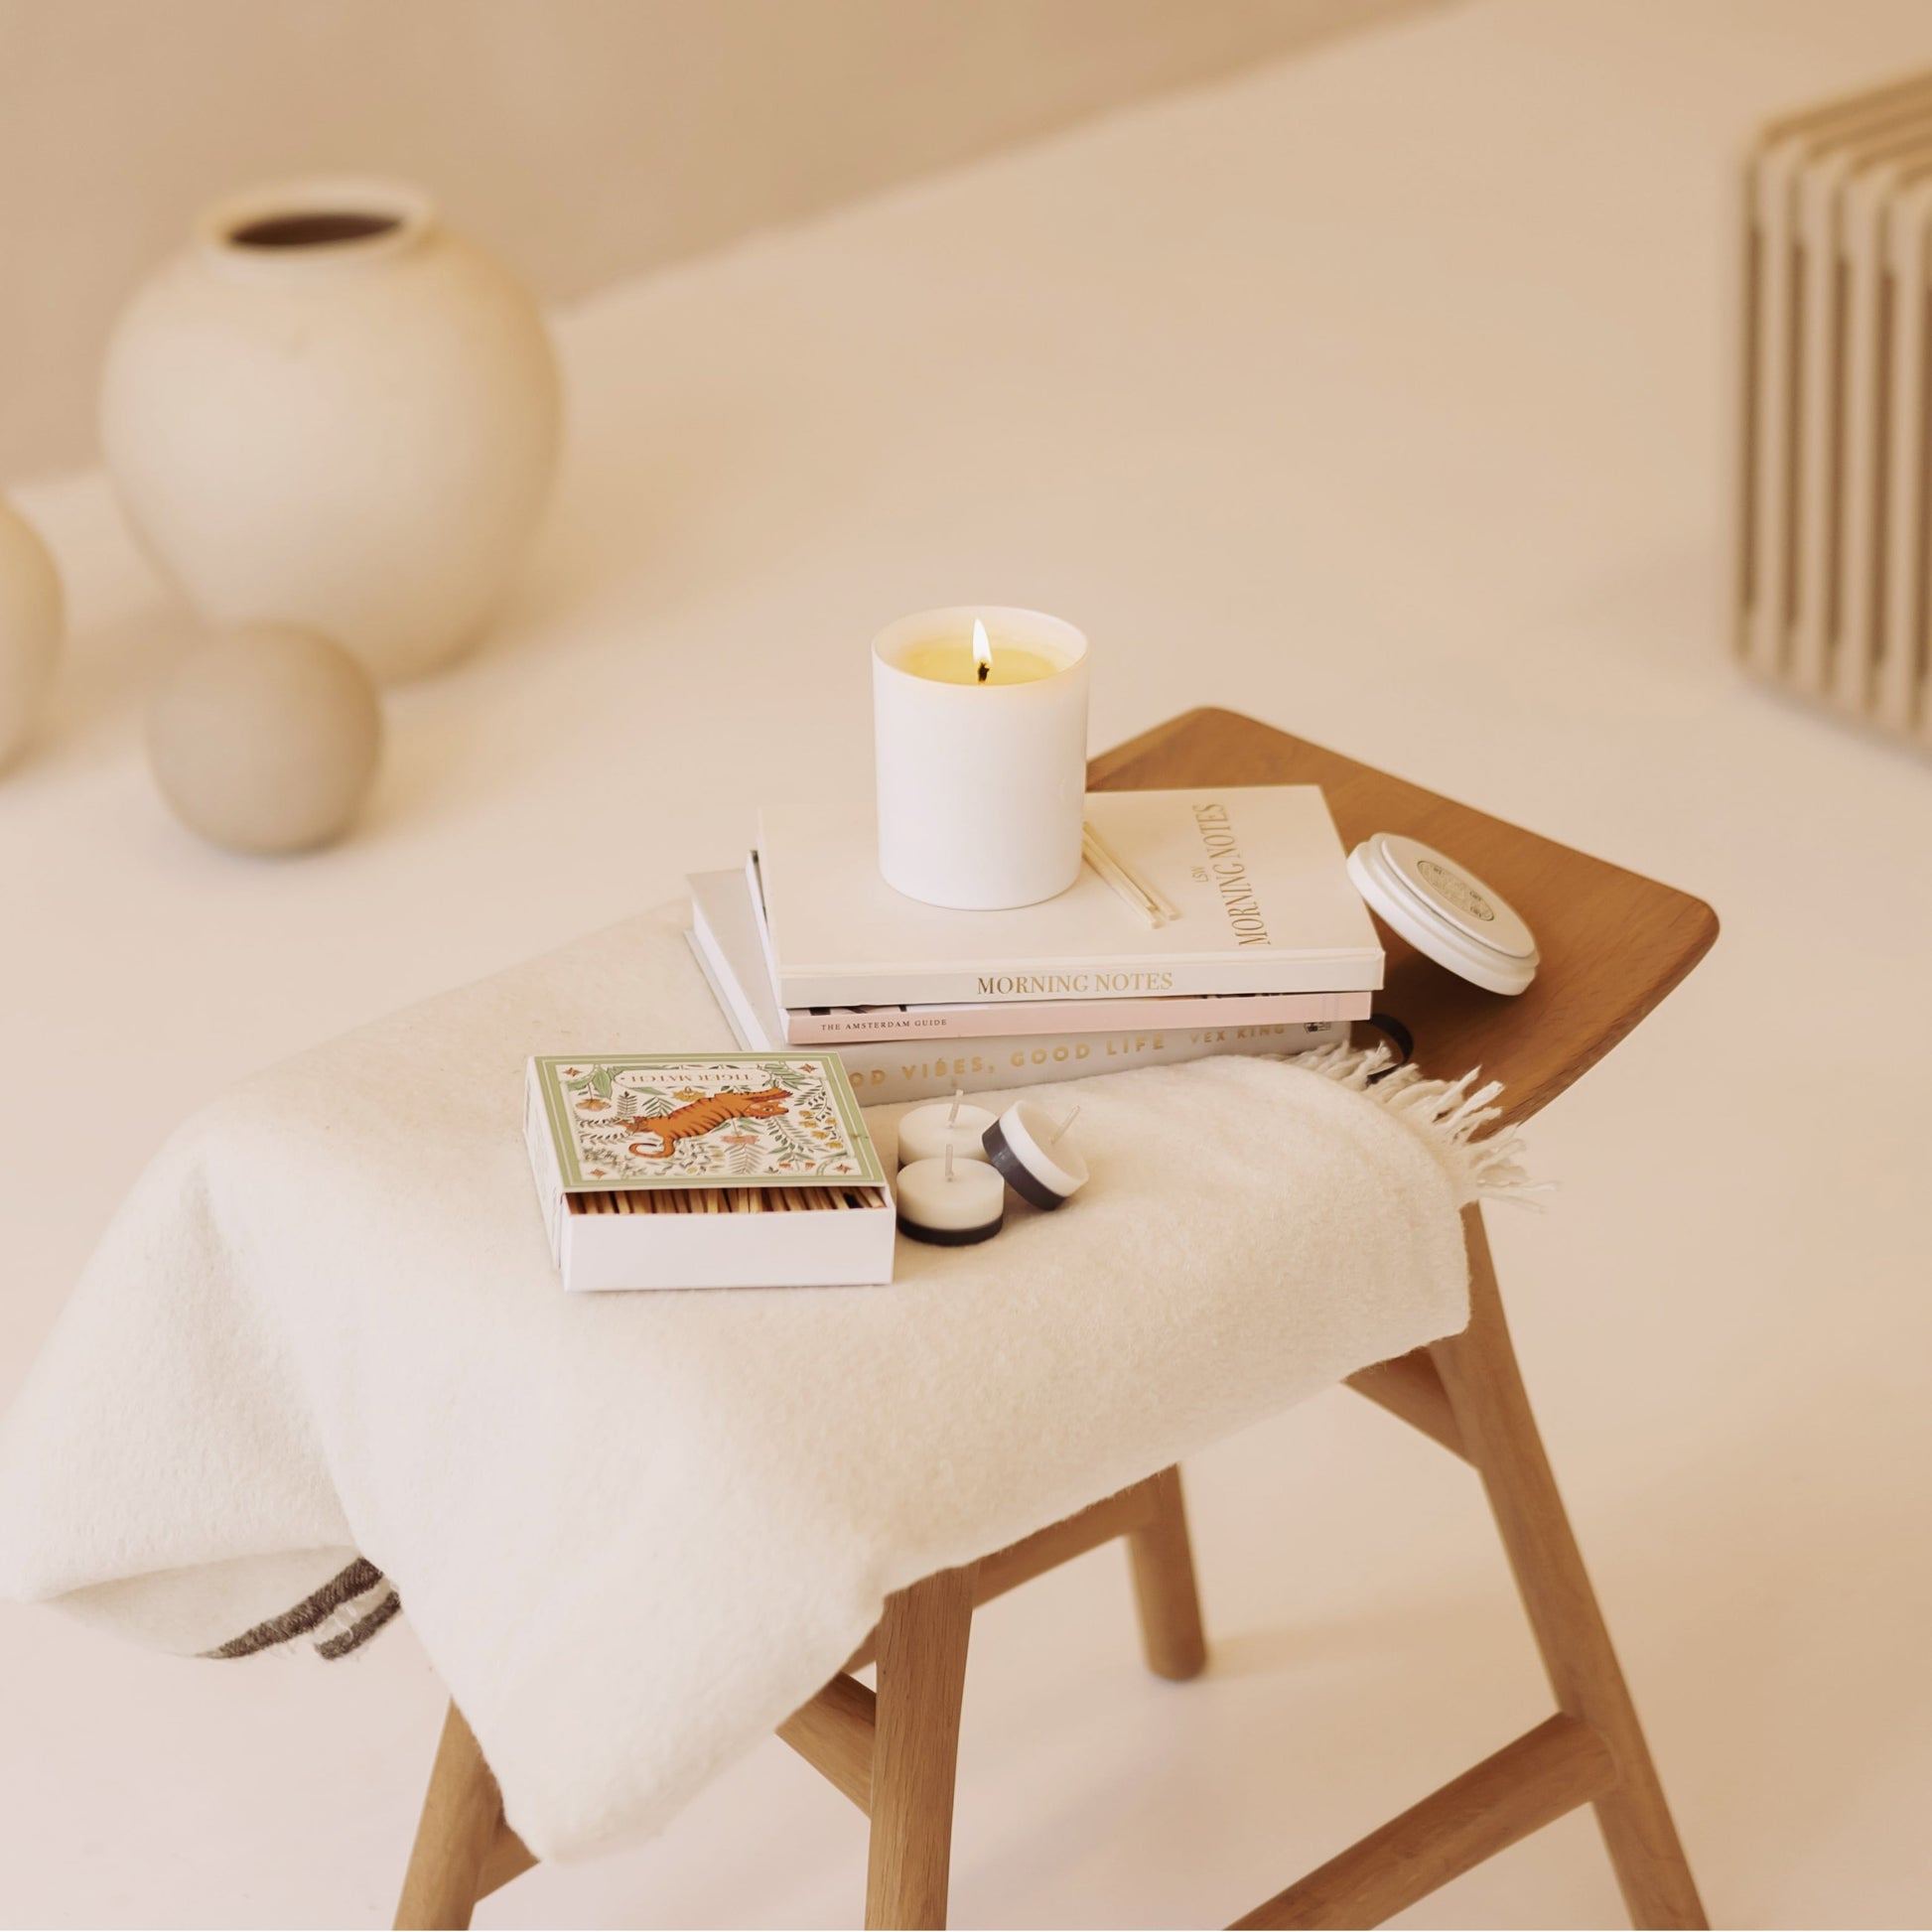 Shō-moon Calm Meditation Candle Resting on Books and Journal in a beige aesthetic